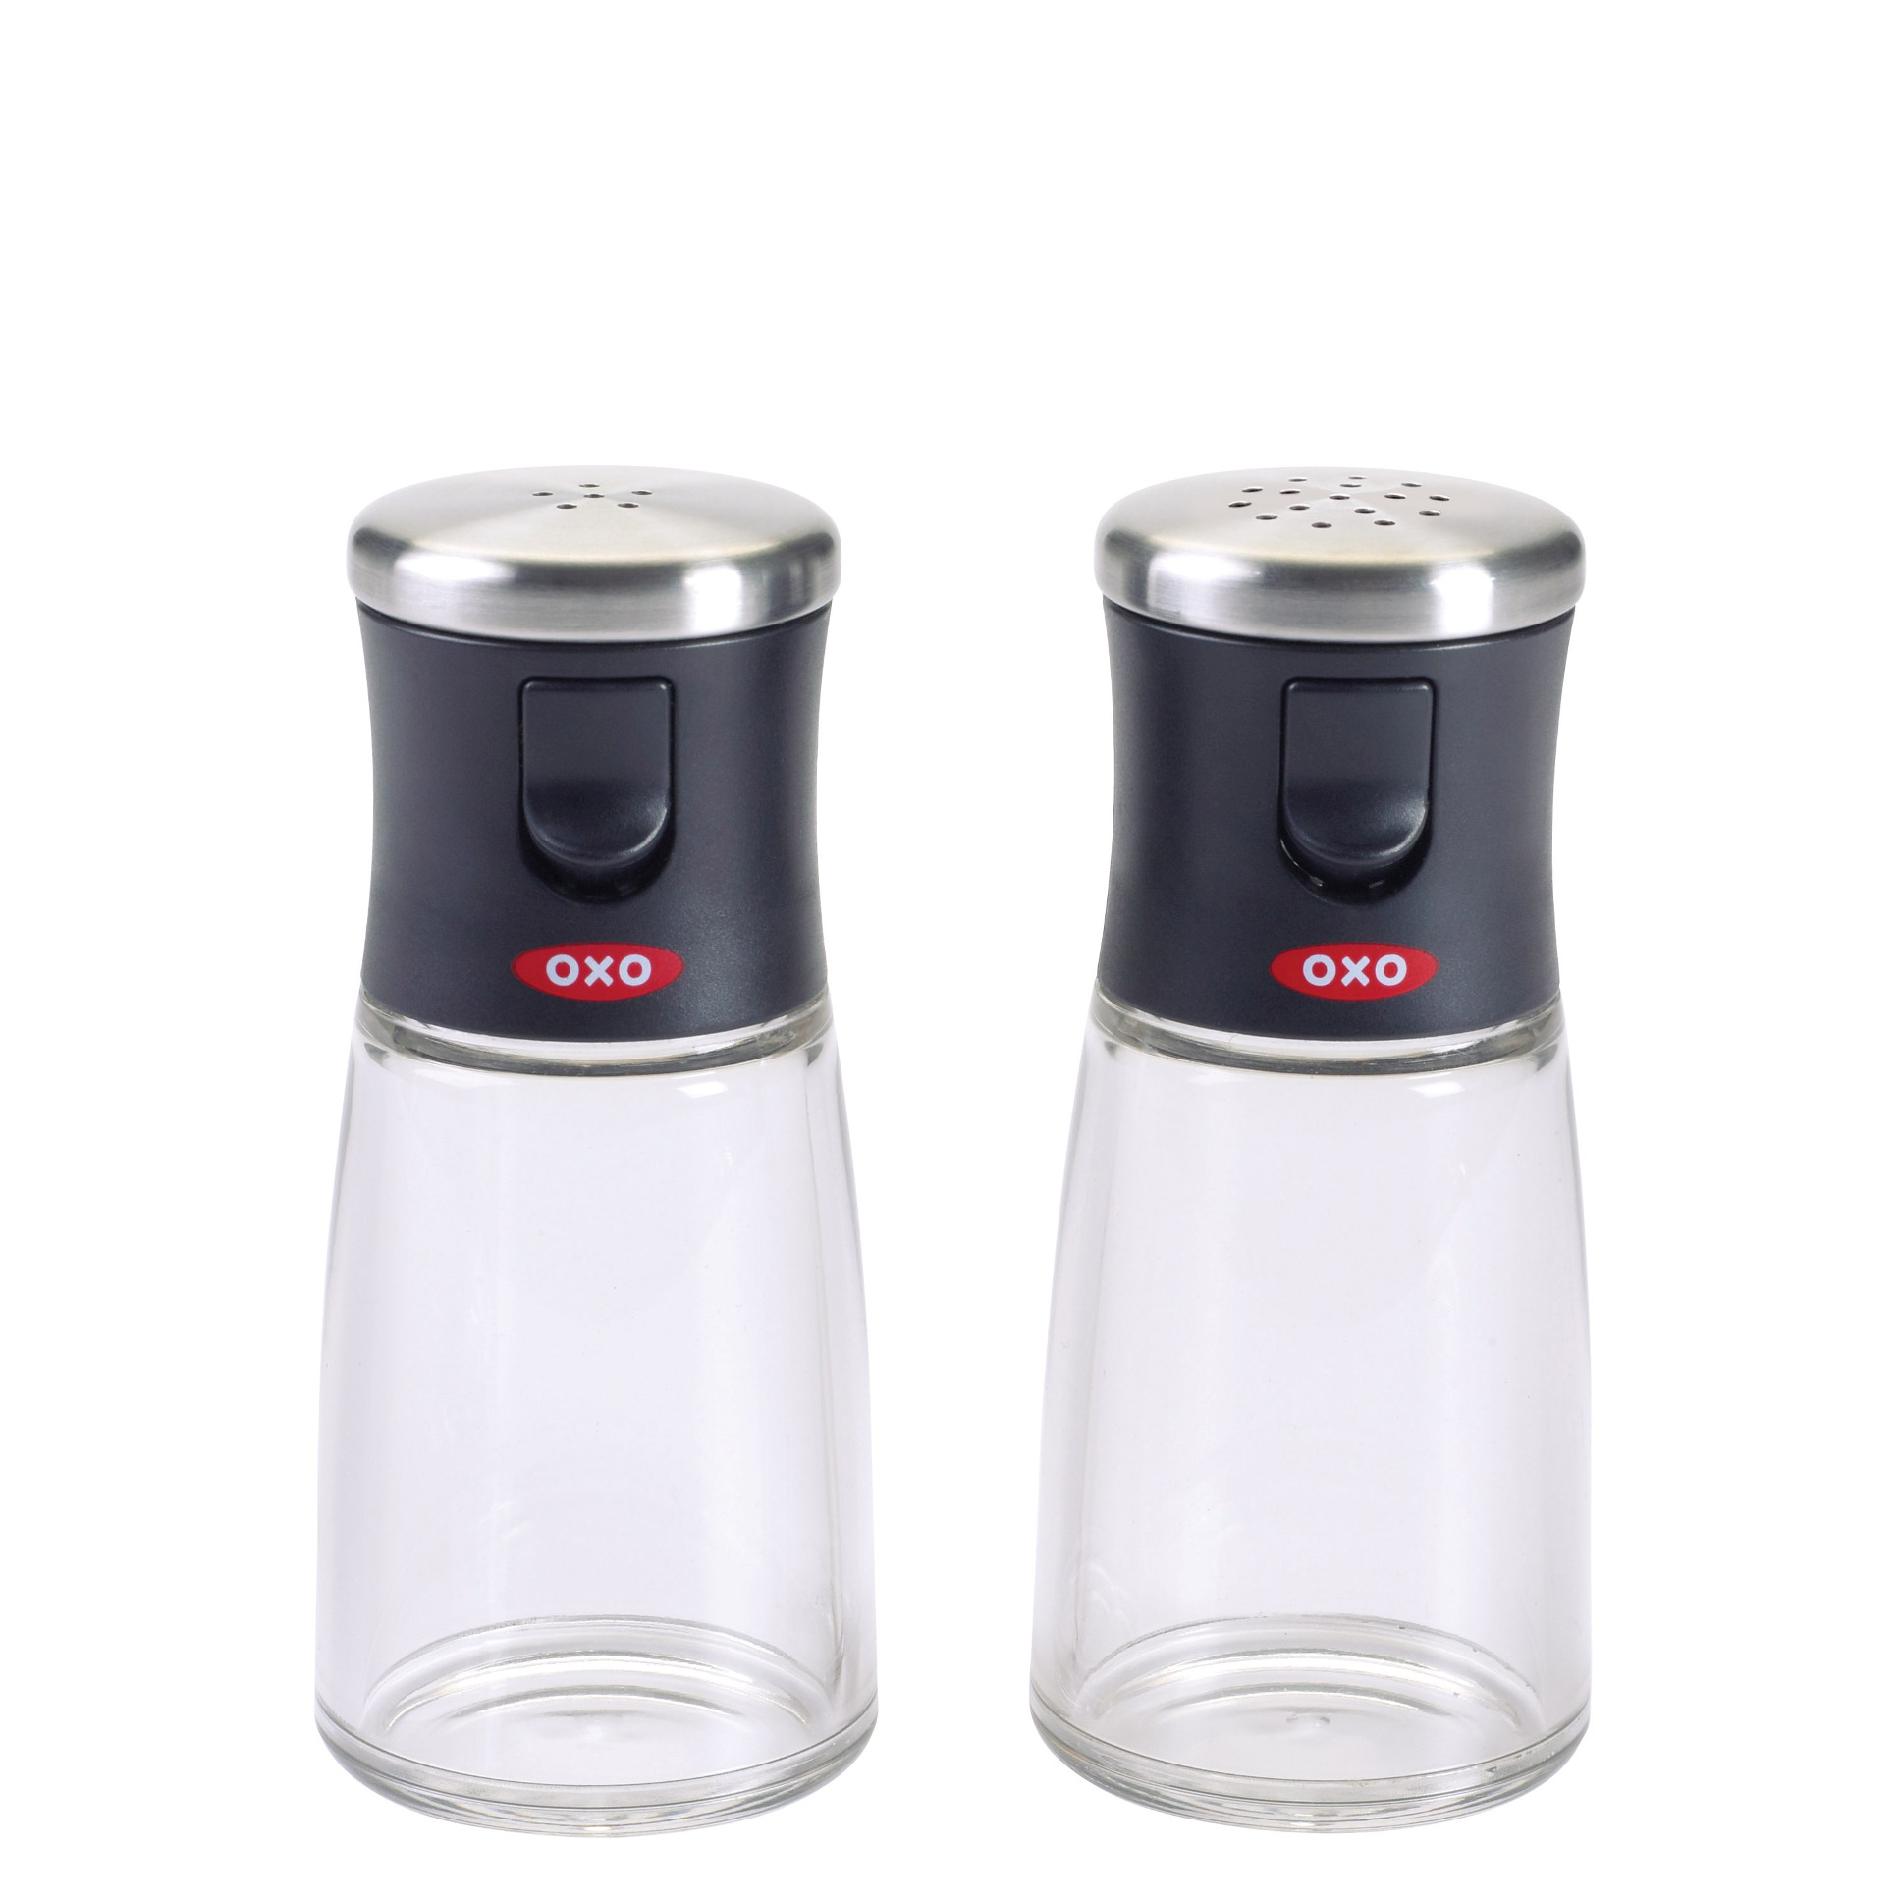 OXO Salt and Pepper Shakers